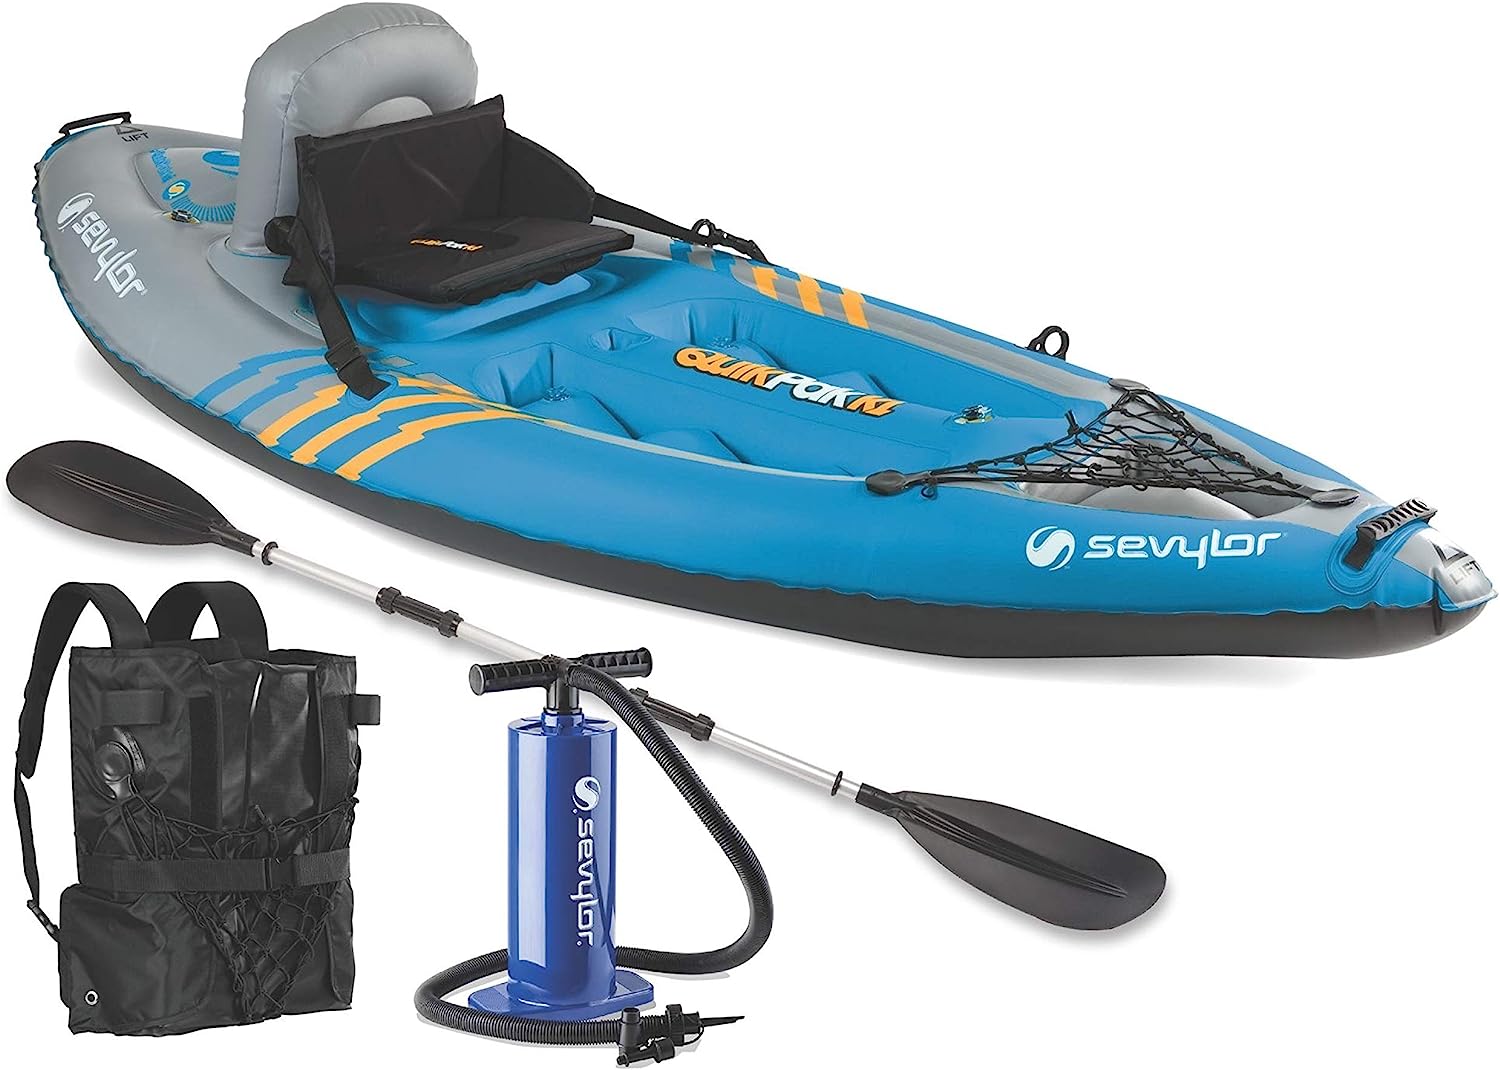 Sevylor QuickPak K1 1-Person Inflatable Kayak, Folds into Backpack with 5-Minute Setup, Hand Pump & Paddle Included